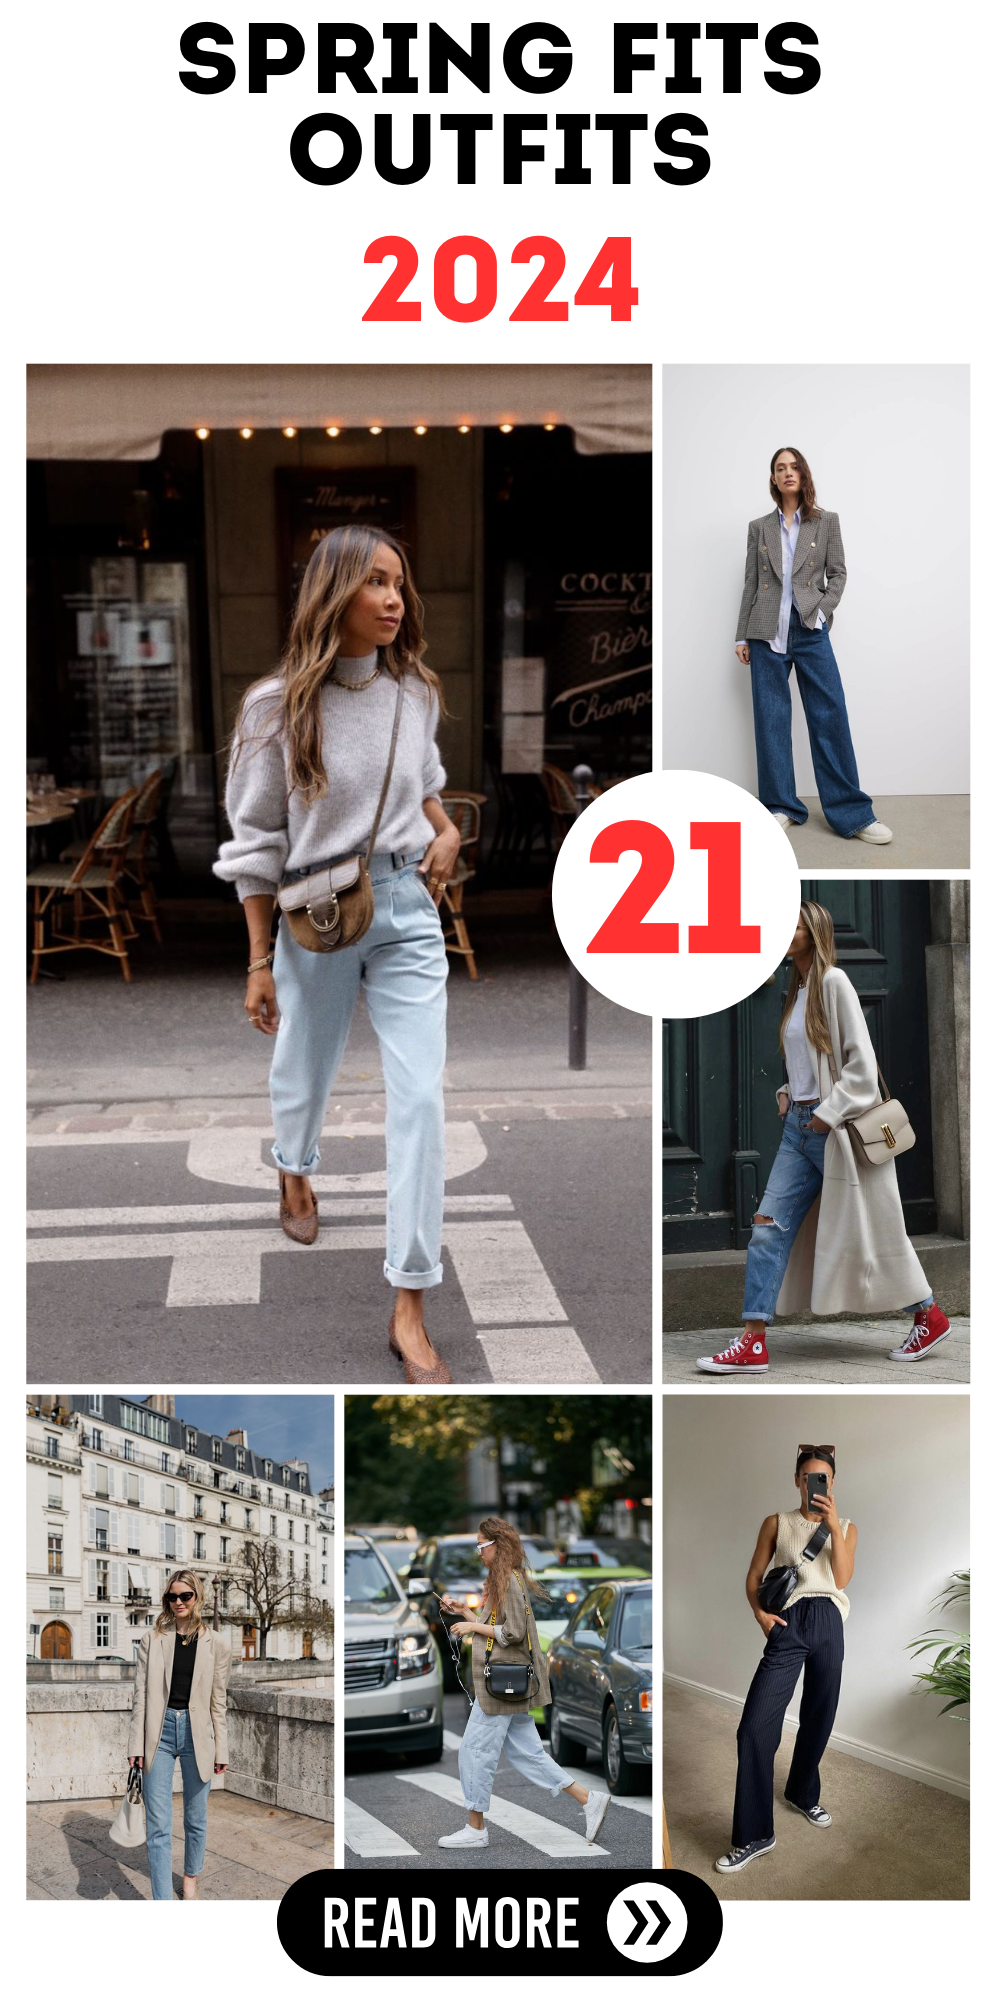 Spring Fits Outfits 2024: Chic Jeans & Trends for Women 25-55